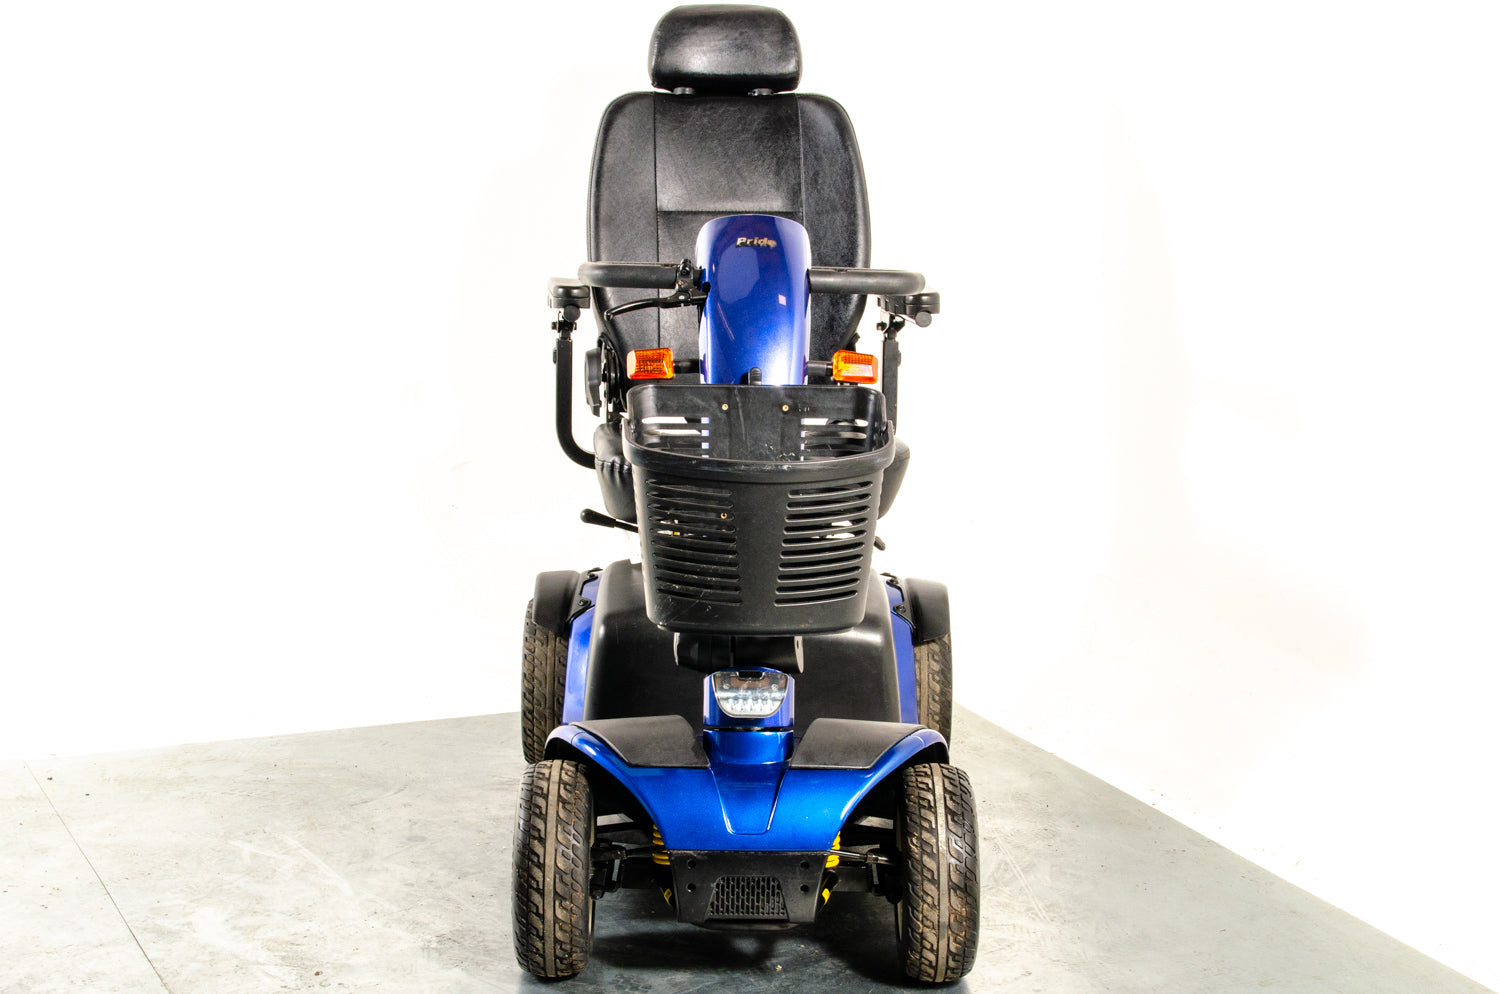 Pride Colt Sport Used Electric Mobility Scooter 8mph Transportable Suspension Blue Pavement Road Legal 13064